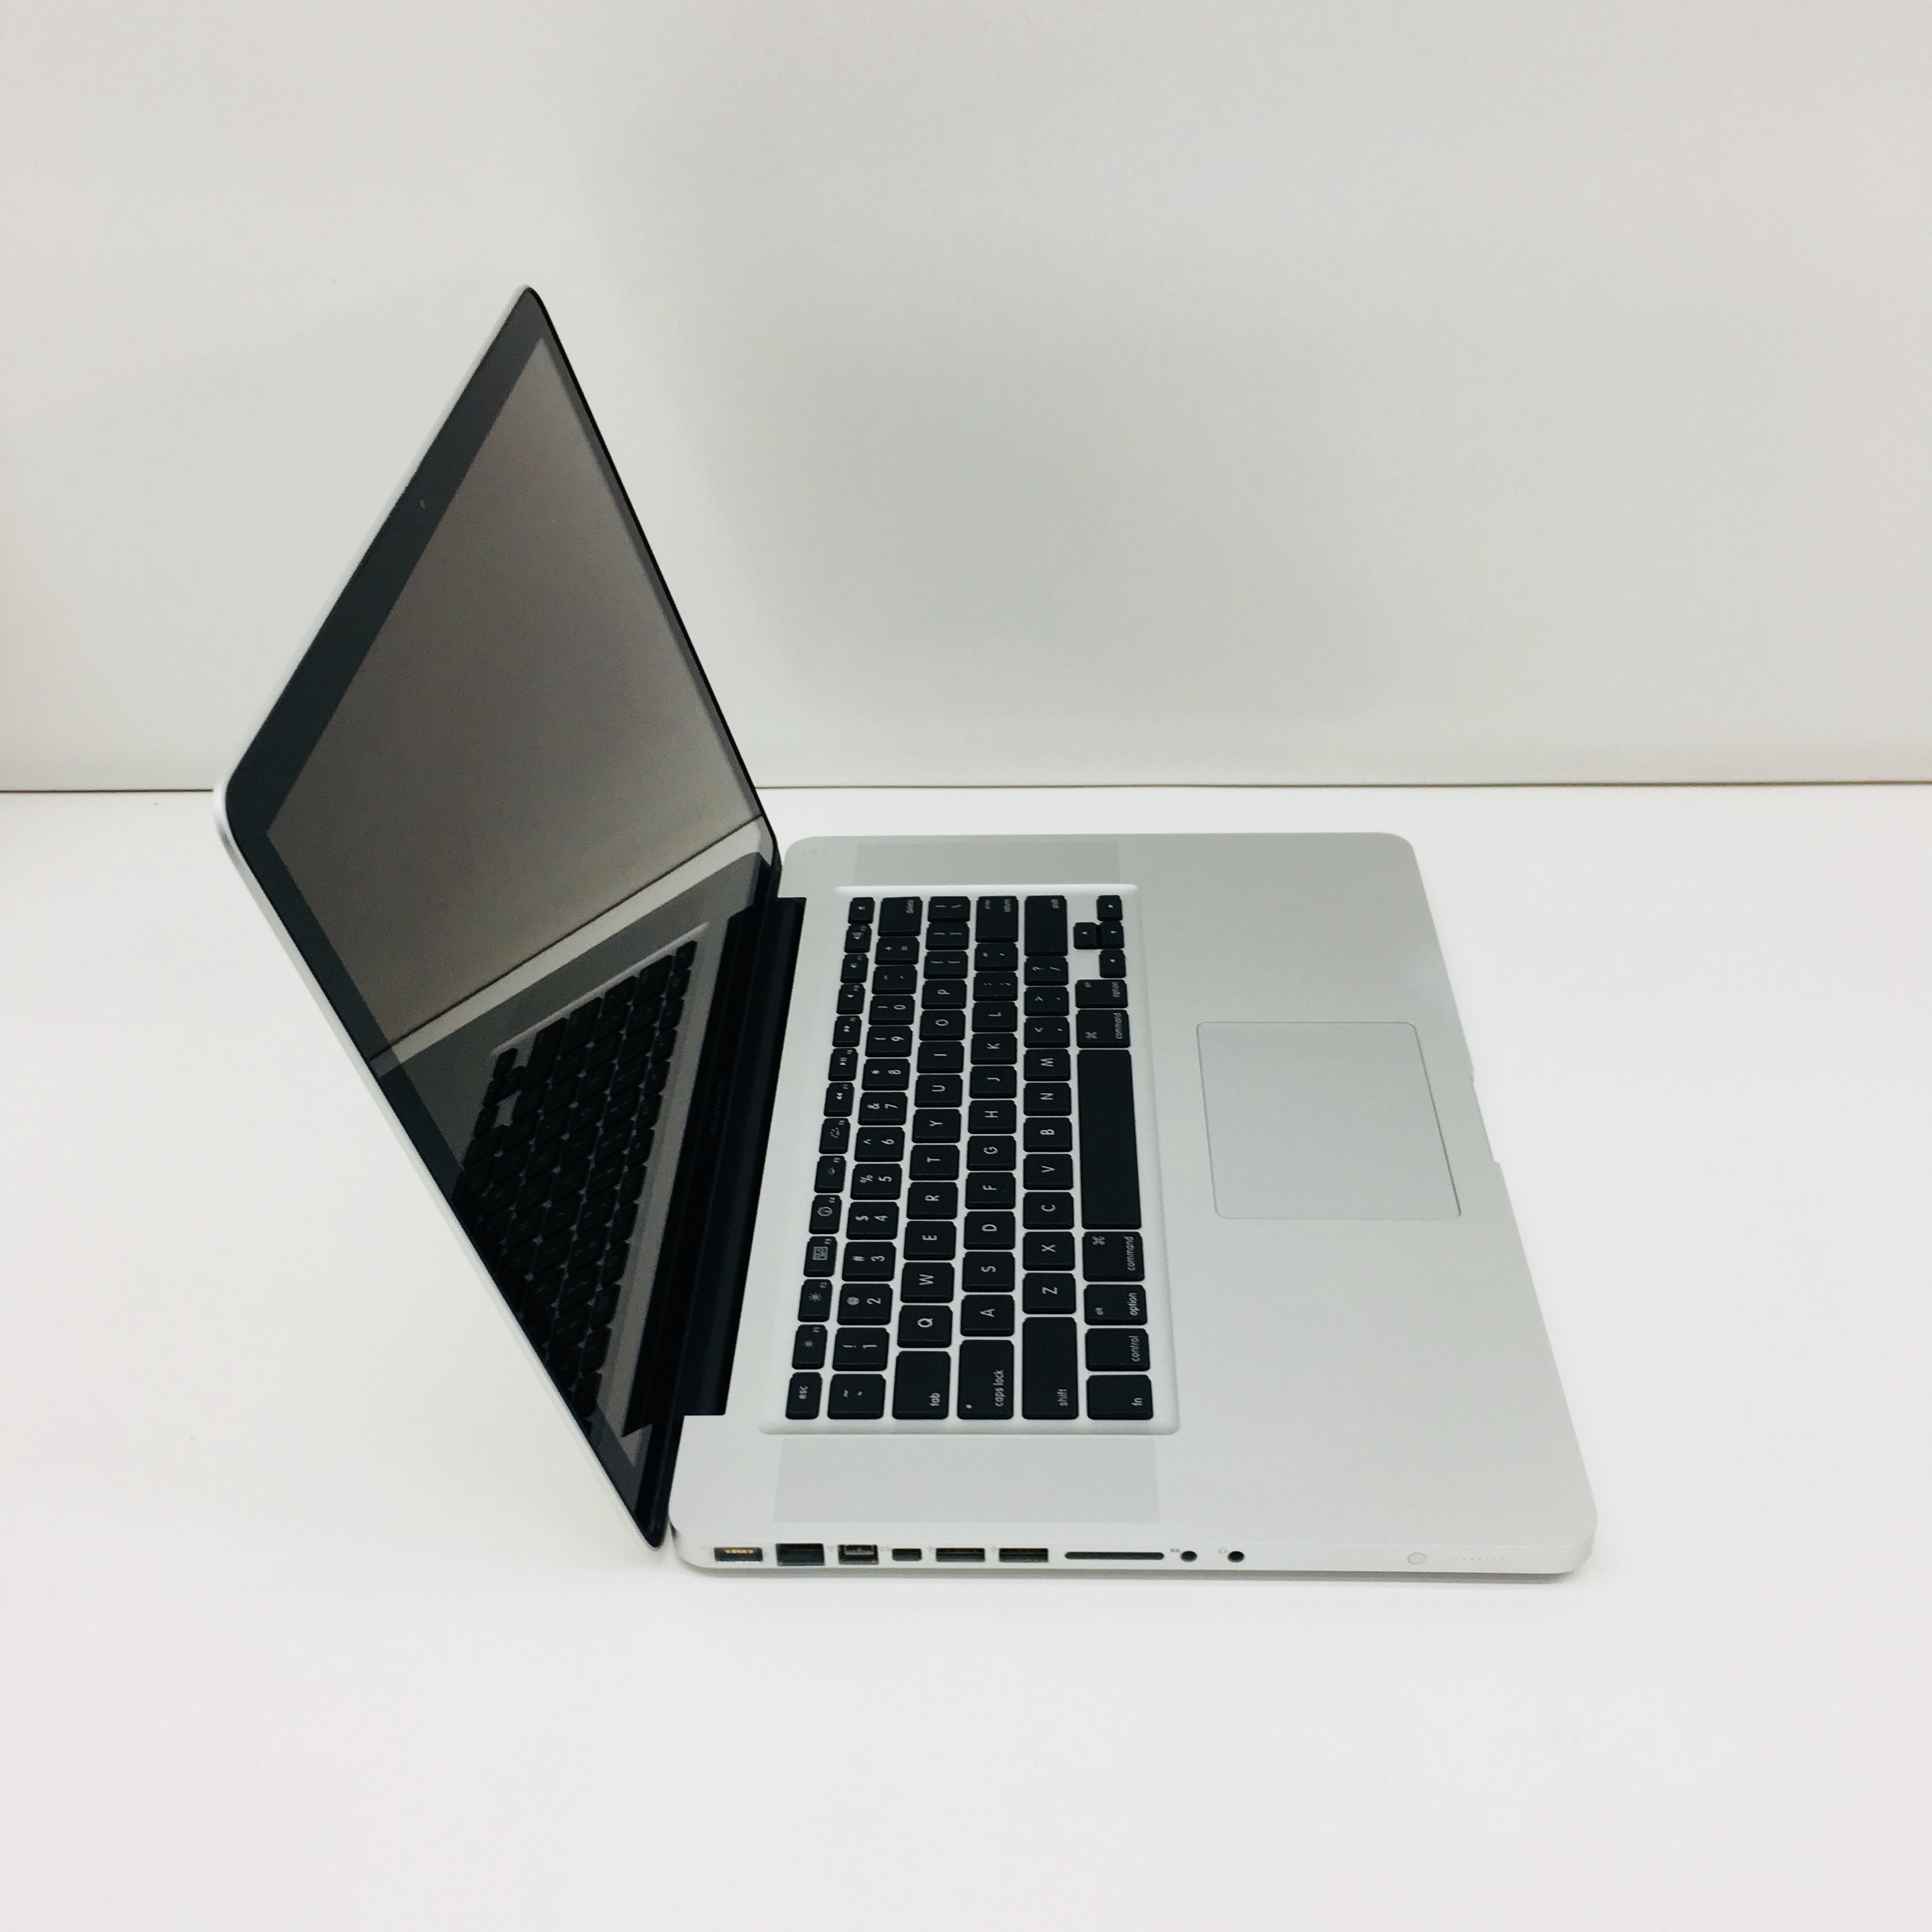 Fully Refurbished MacBook Pro 15" Mid 2009 INTEL CORE 2 DUO 2.66GHZ ...